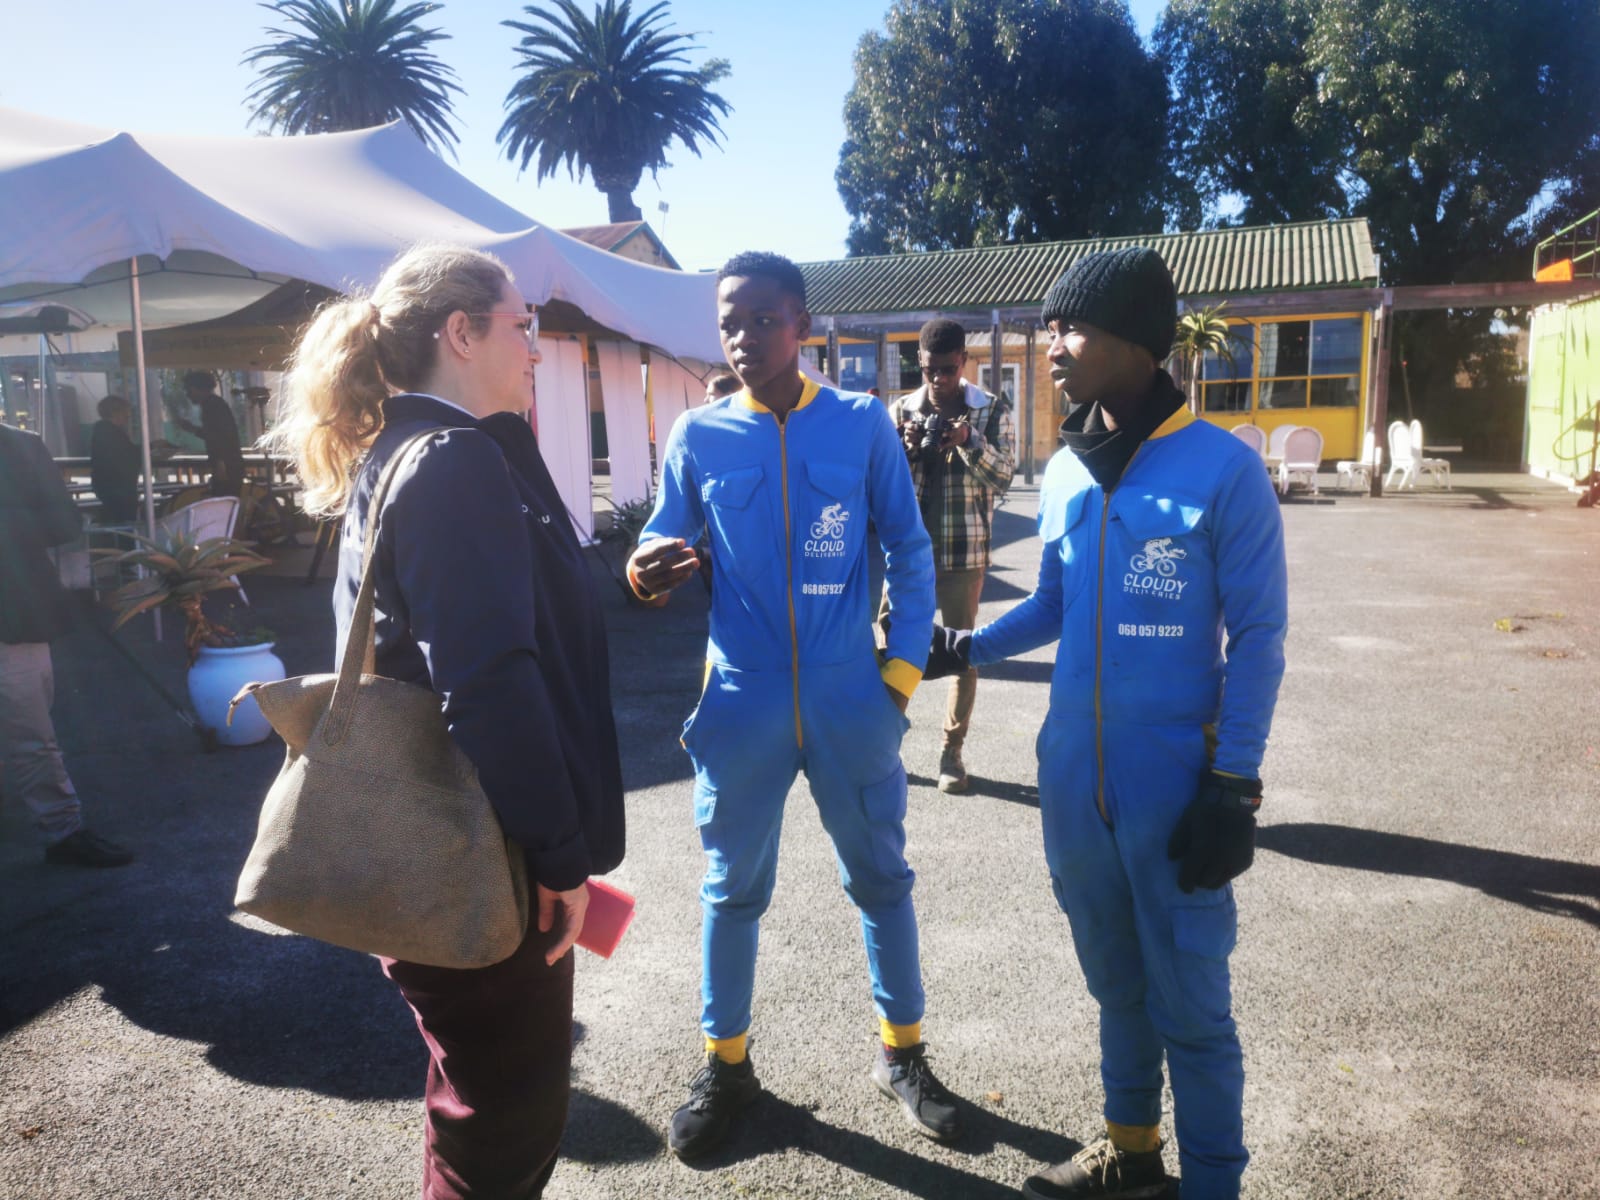 Ben Booster Fund showcase, Langa - Cloudy Deliveries